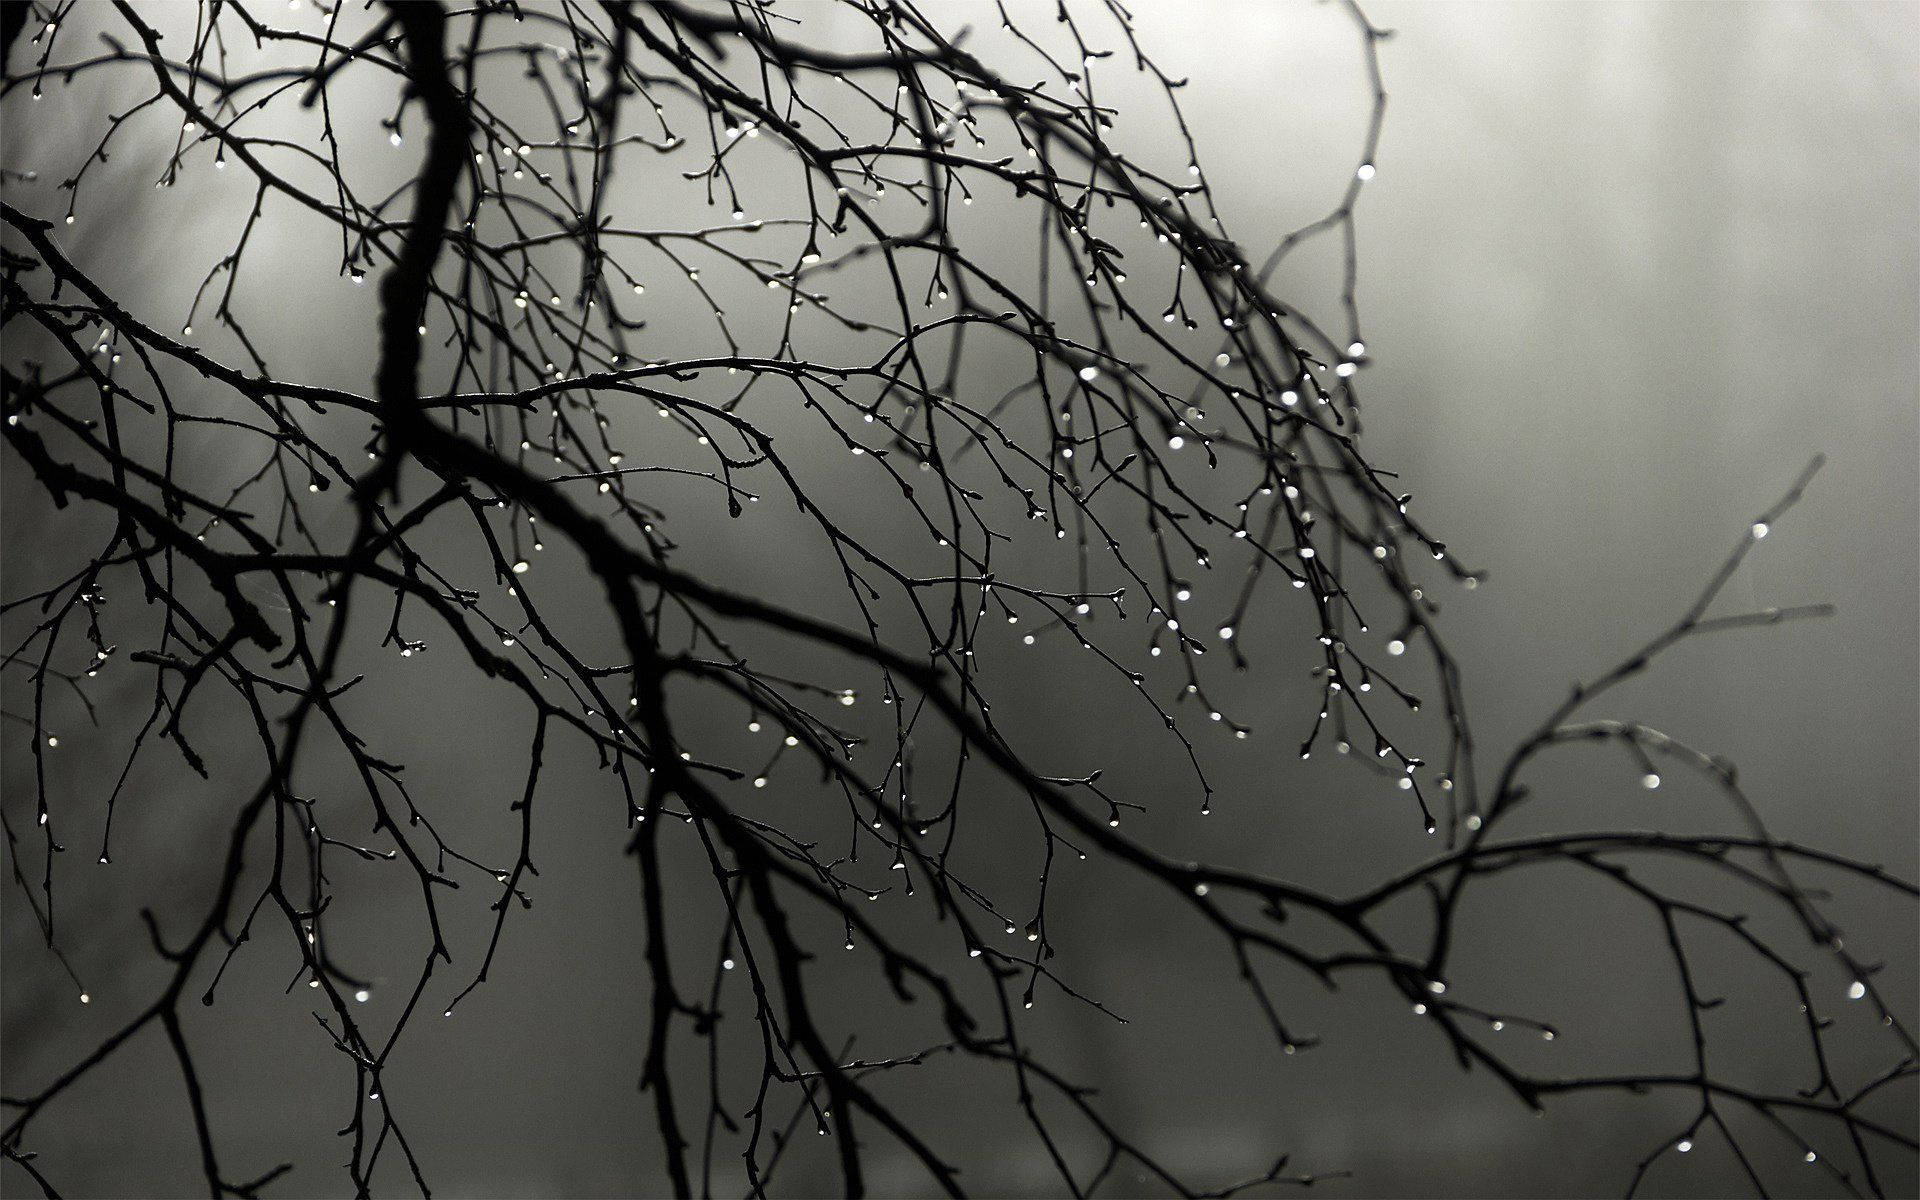 A Bare Tree Covered in Raindrops Against a Misty Grey Background Wallpaper